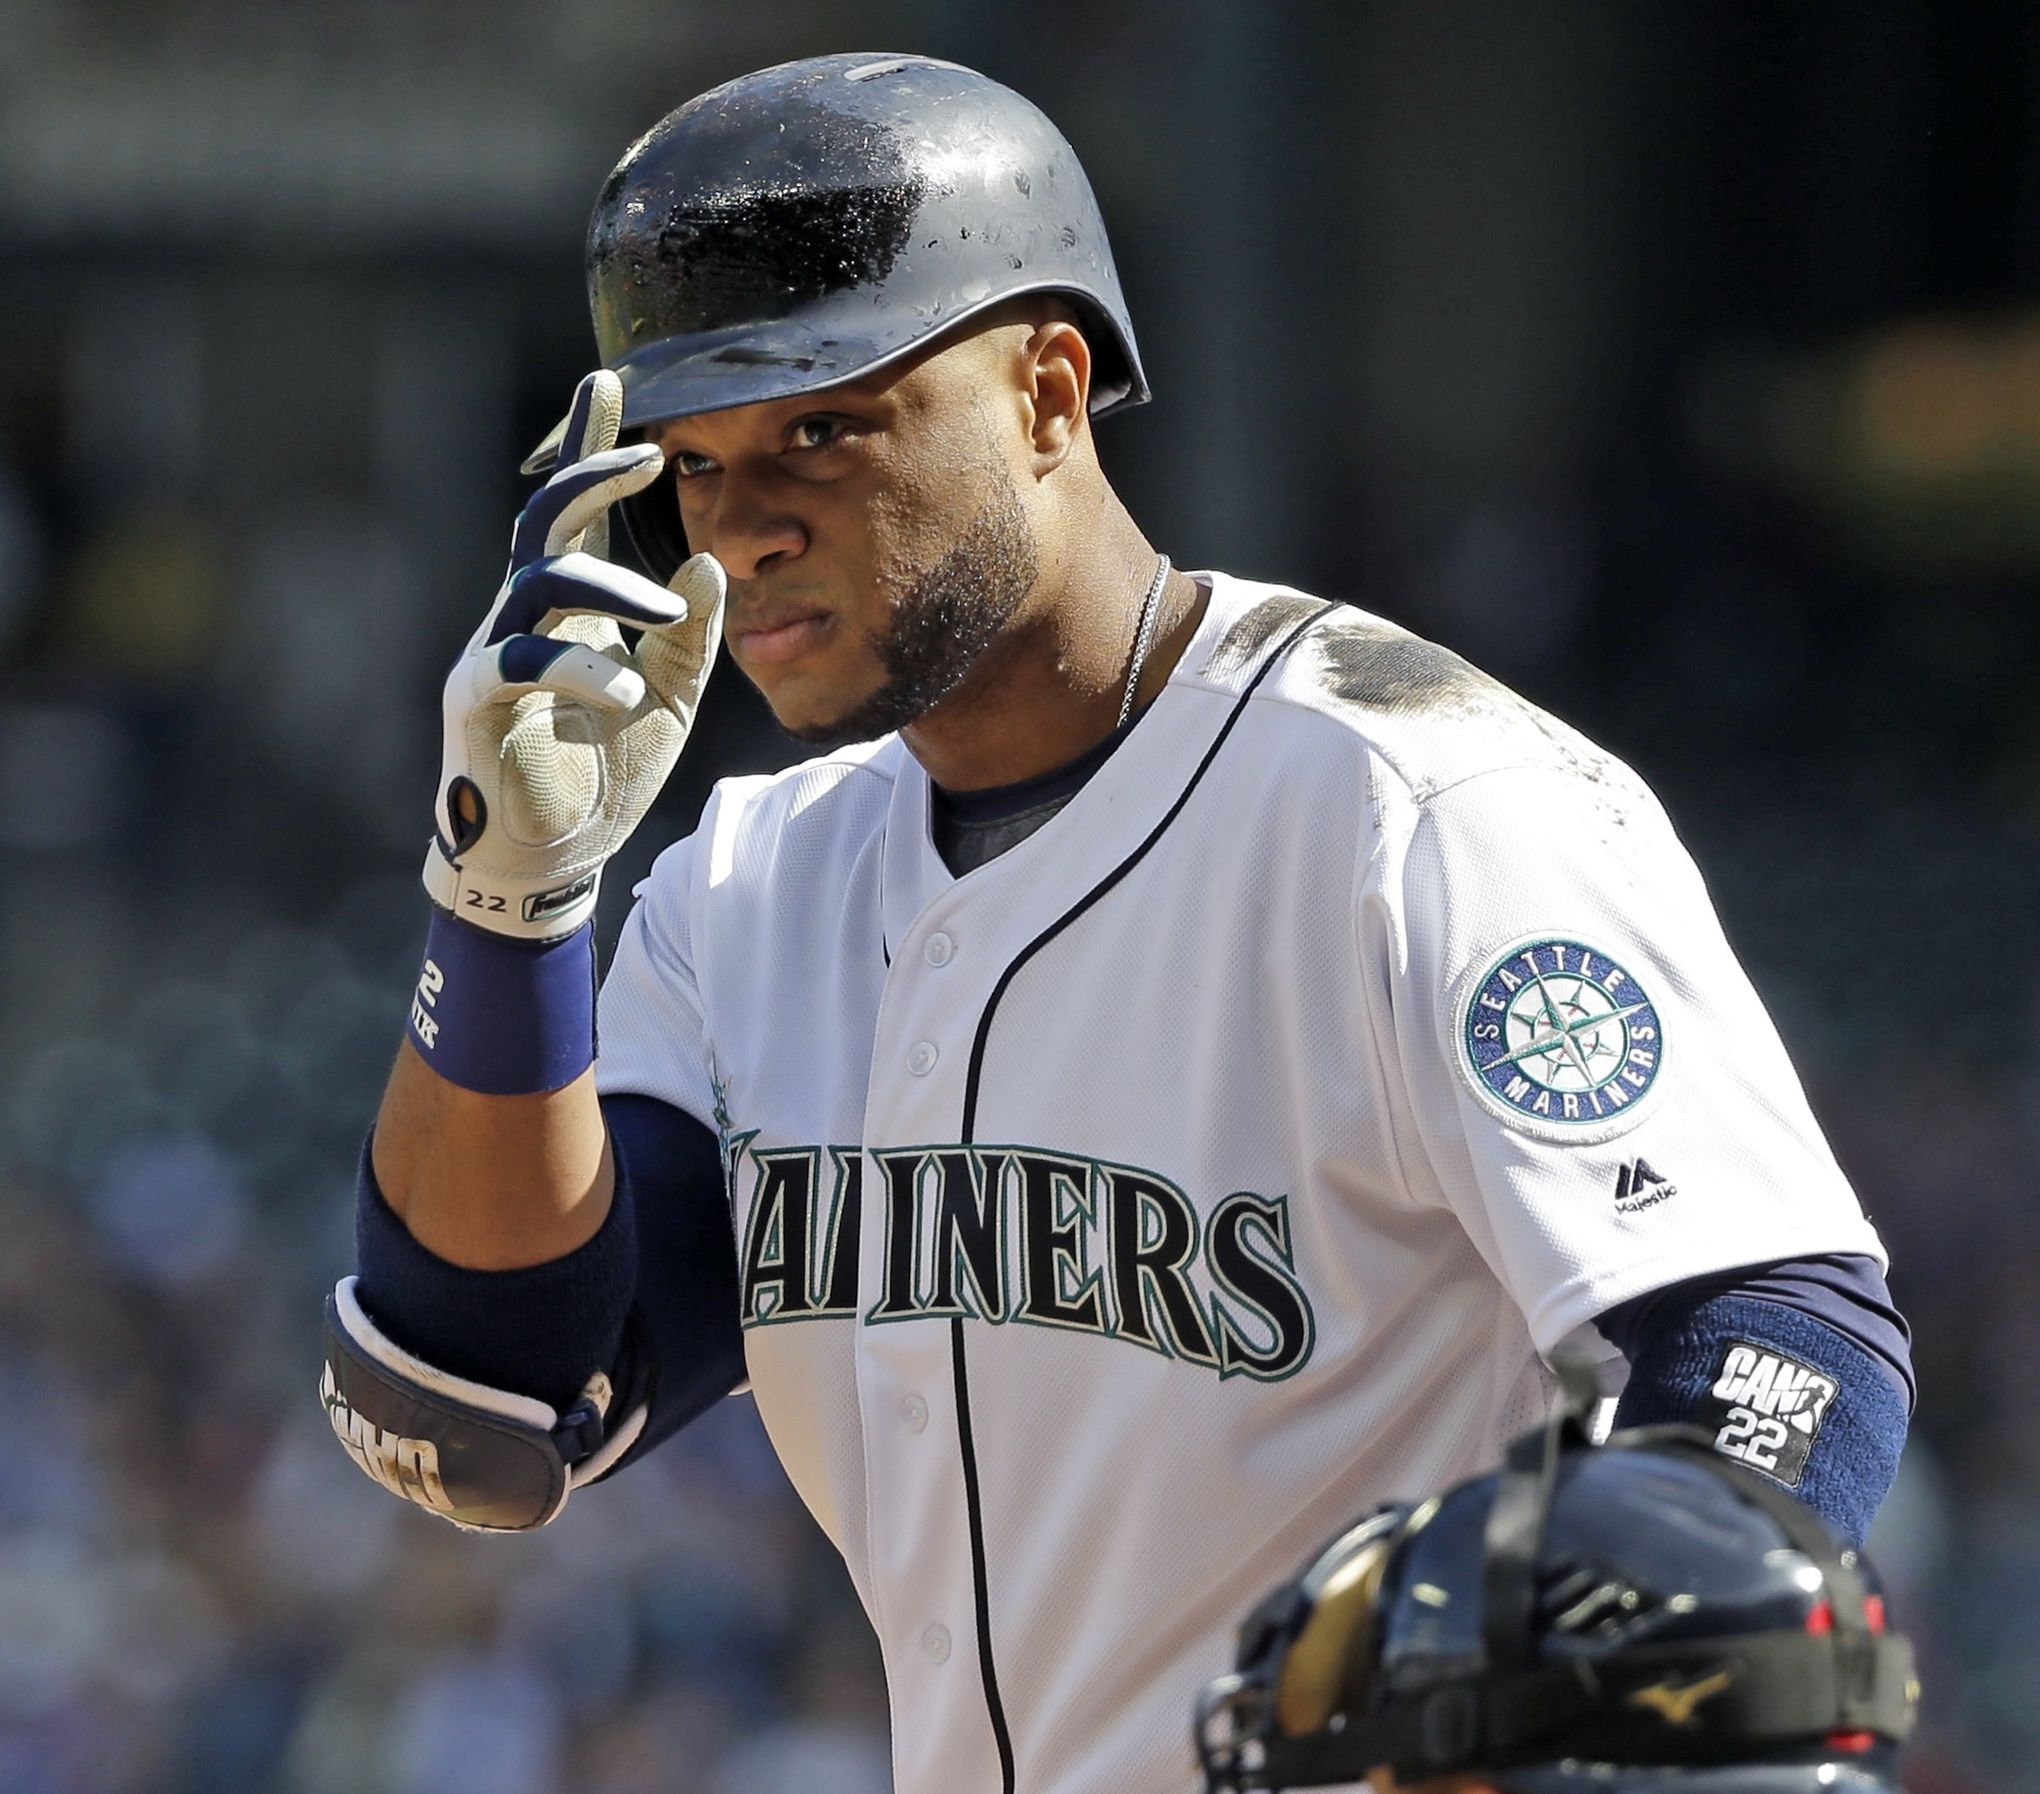 Robinson Cano did his part, but did the Mariners do theirs?